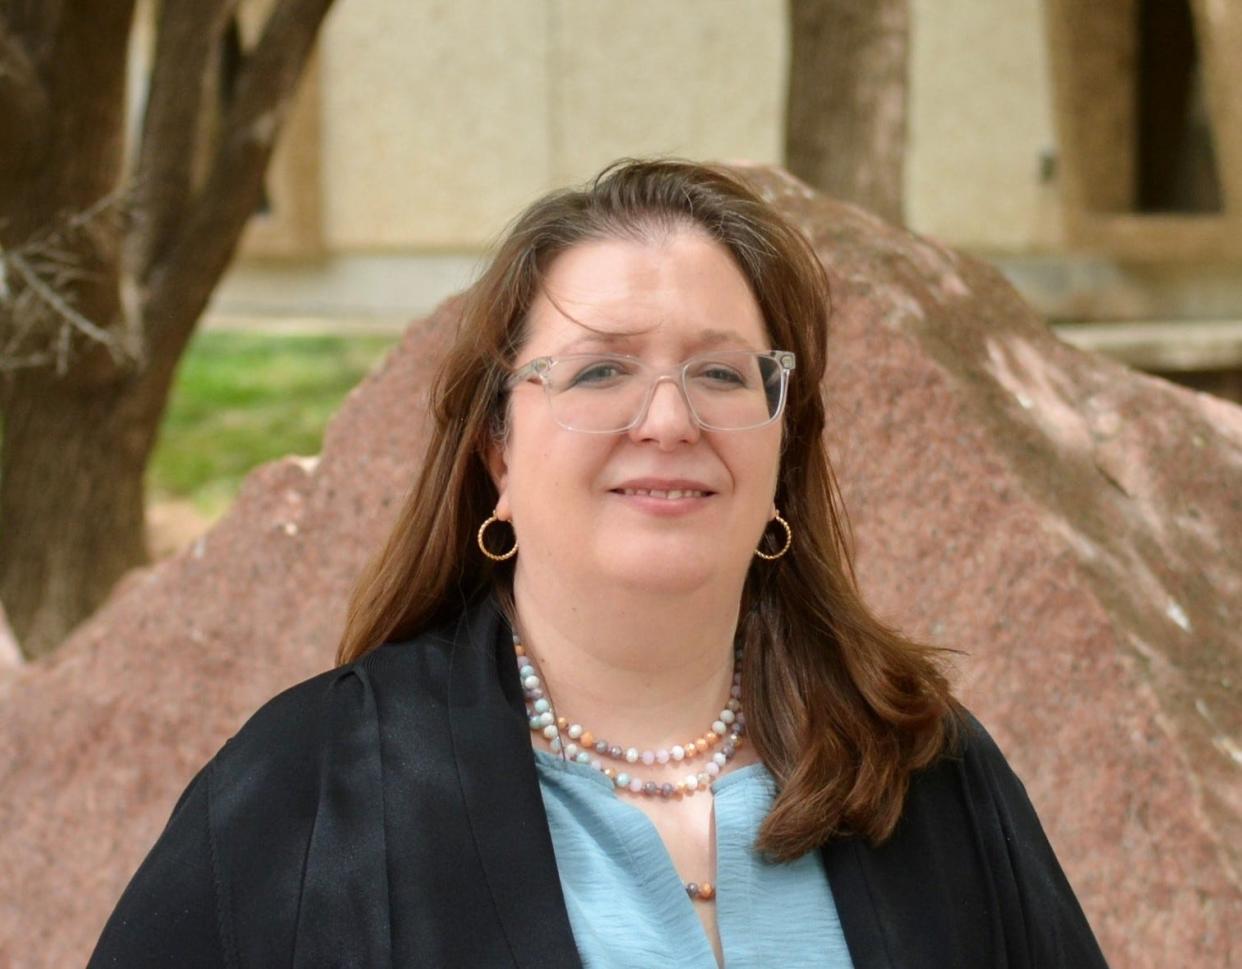 The City of Amarillo announced Katrina Owens as its new finance director during Tuesday’s city council meeting.